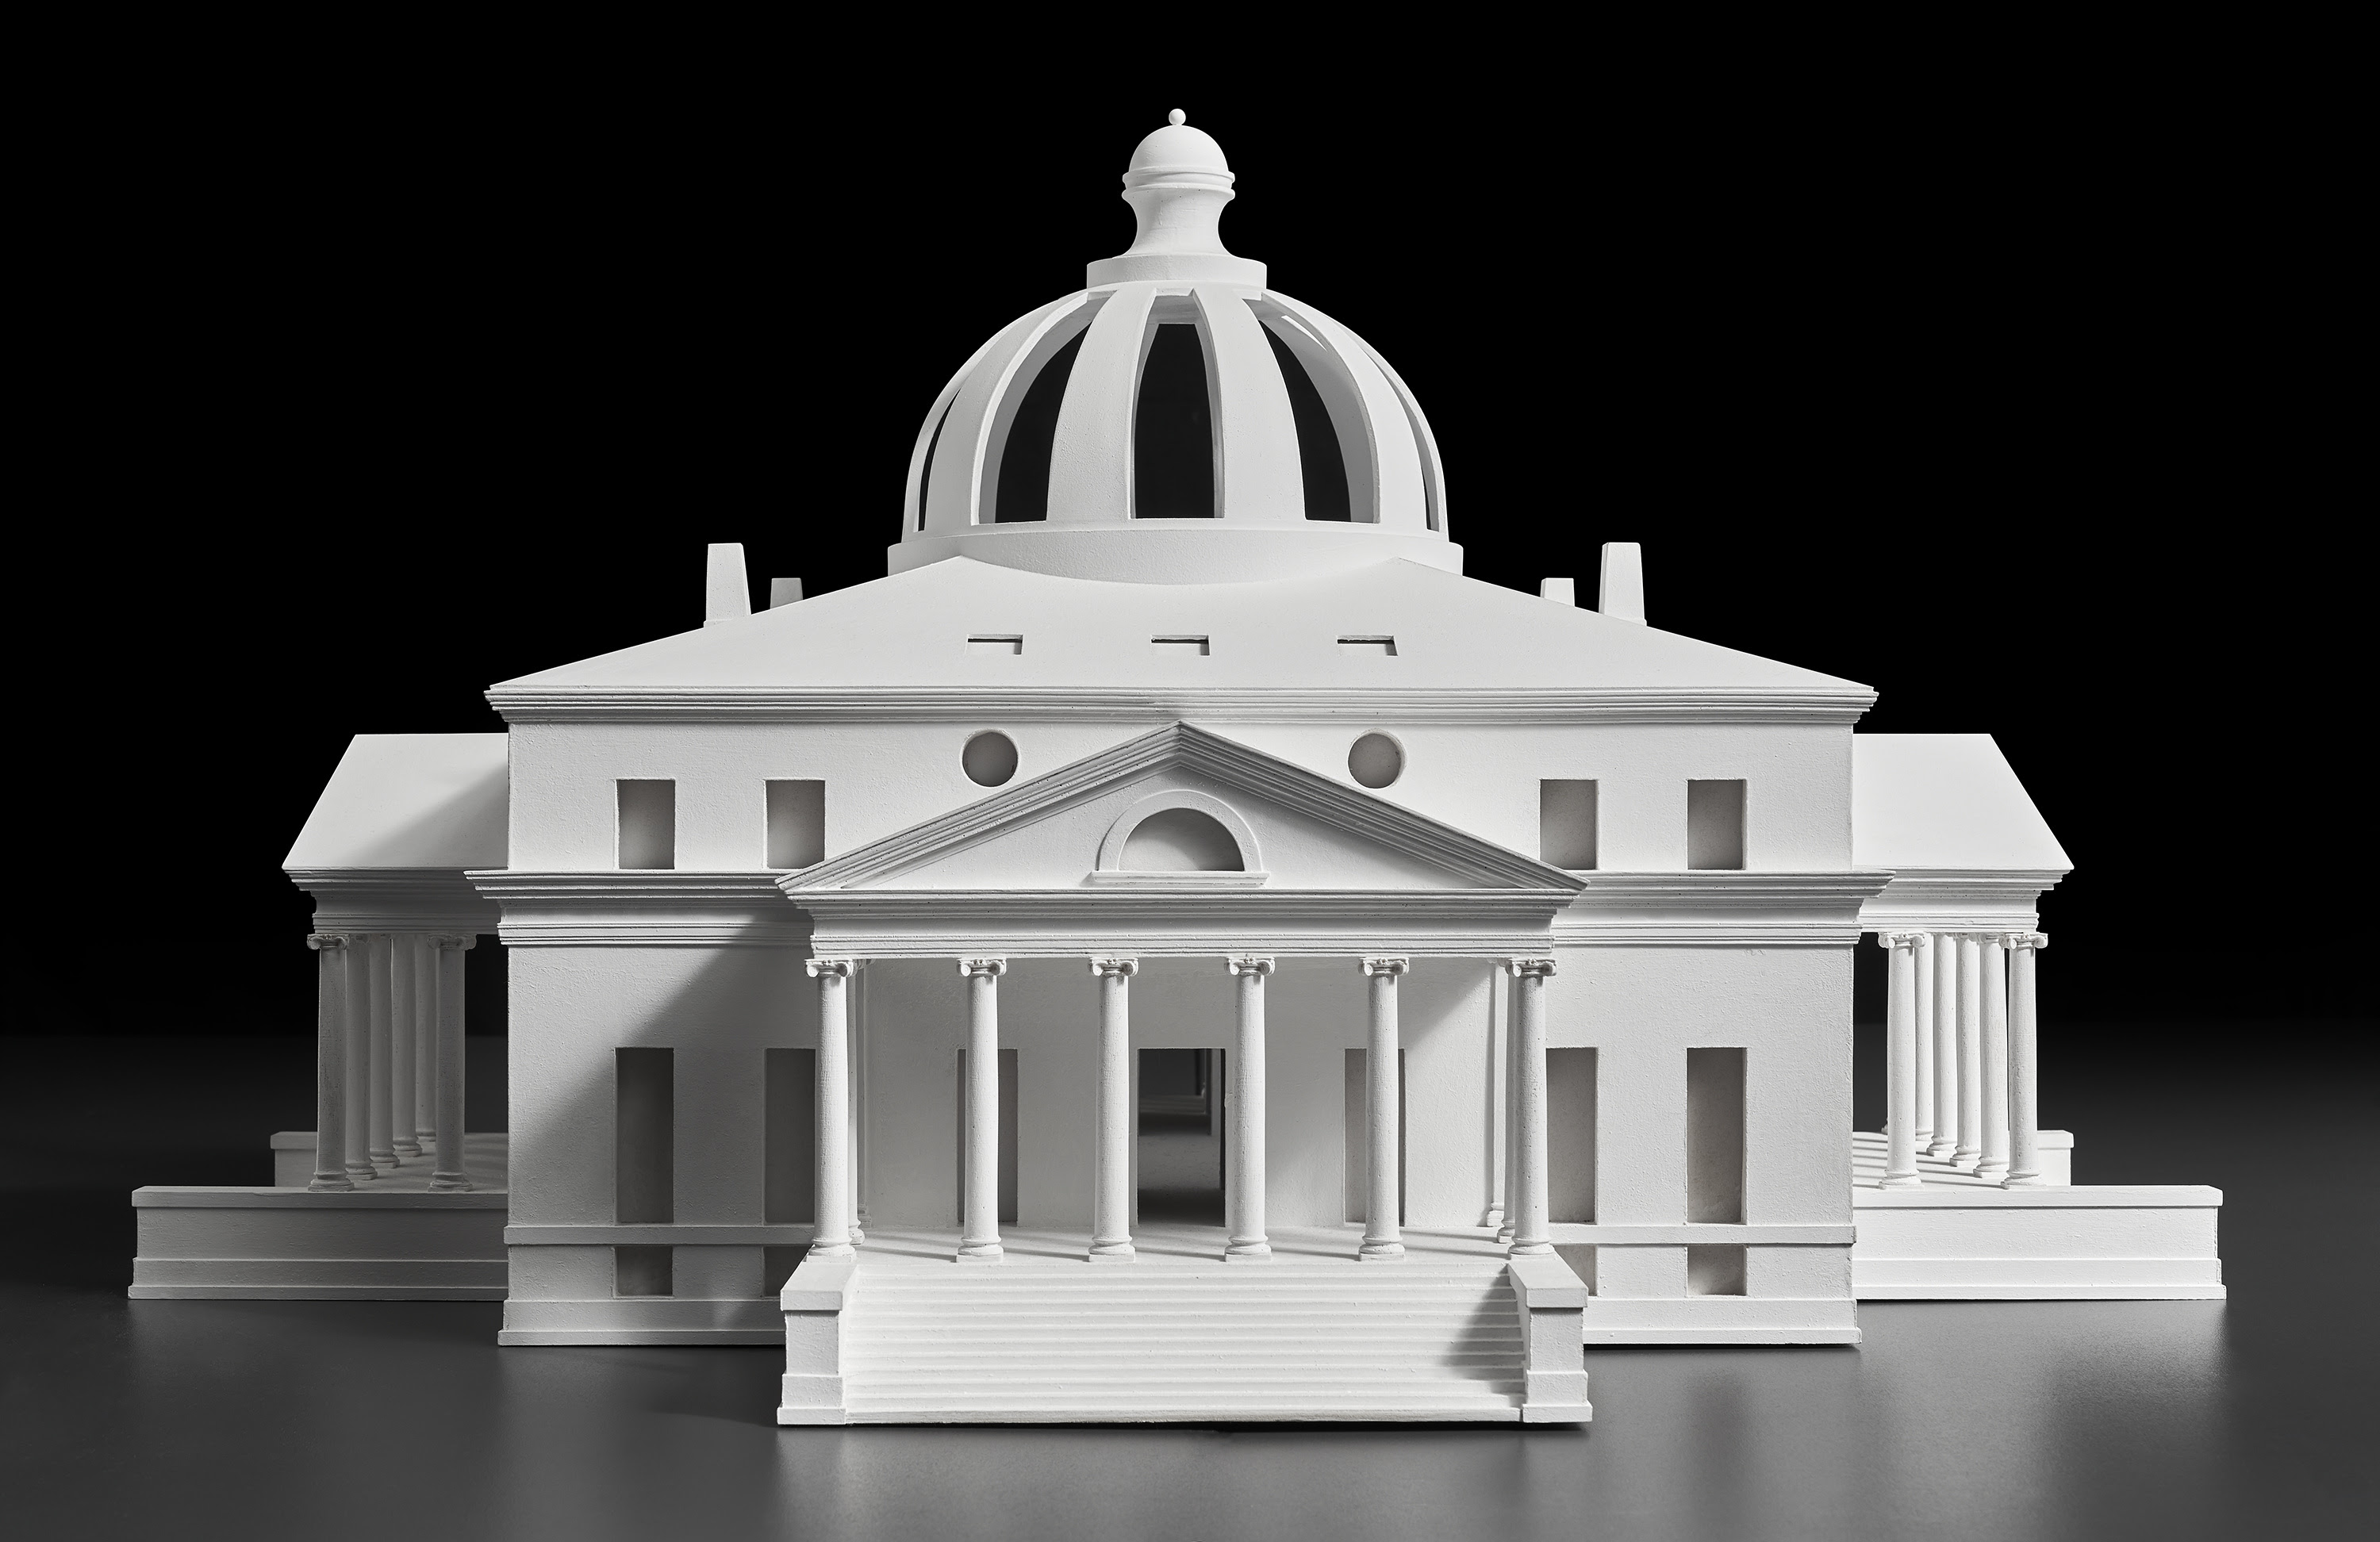 Photo of an architectural model of a neoclassical house